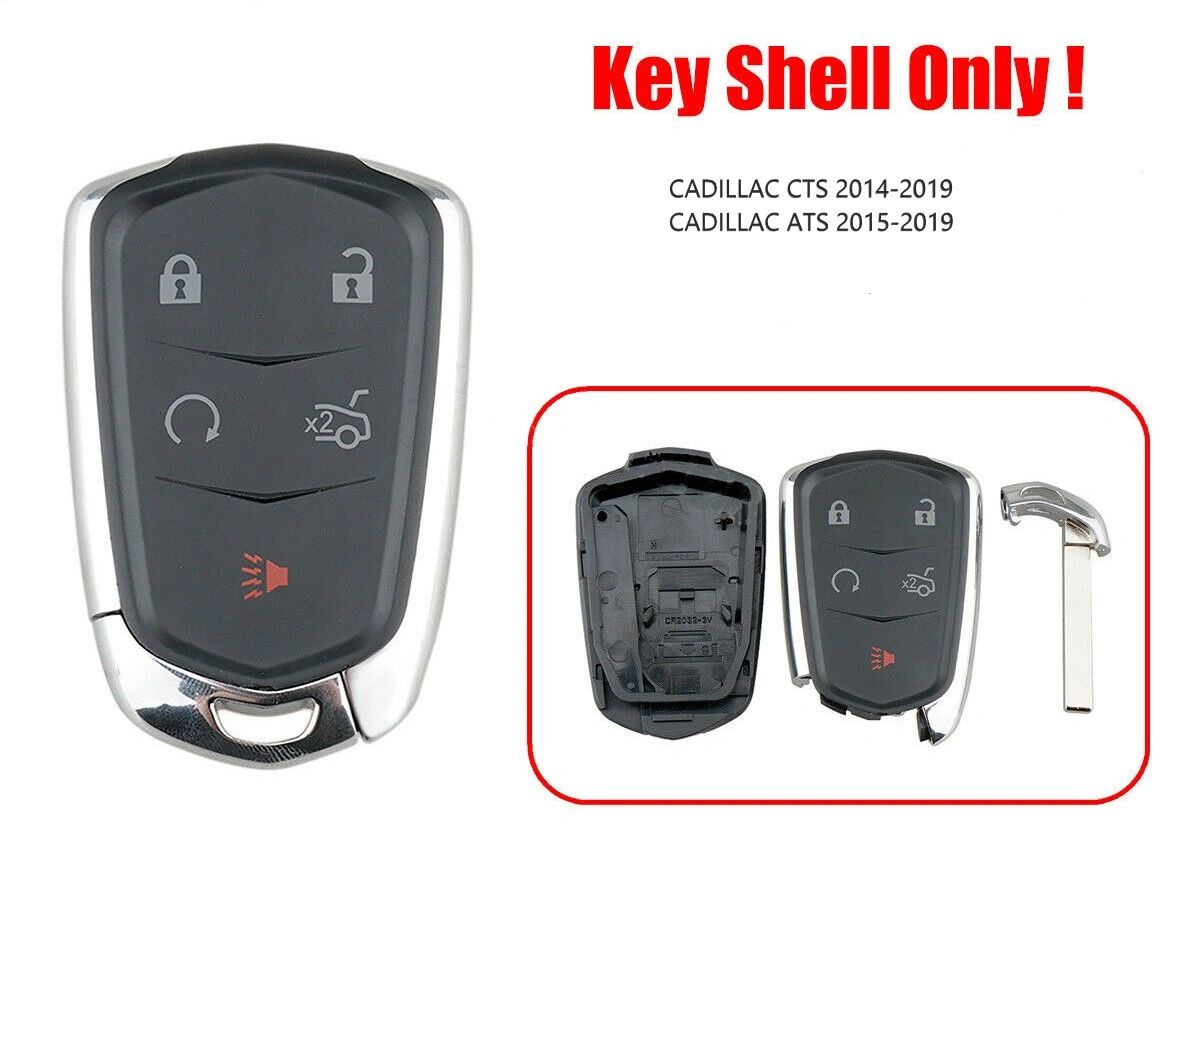 CADILLAC CTS 2014-2019 WITH LOGO REPLACEMENT KEY FOB SHELL ONLY